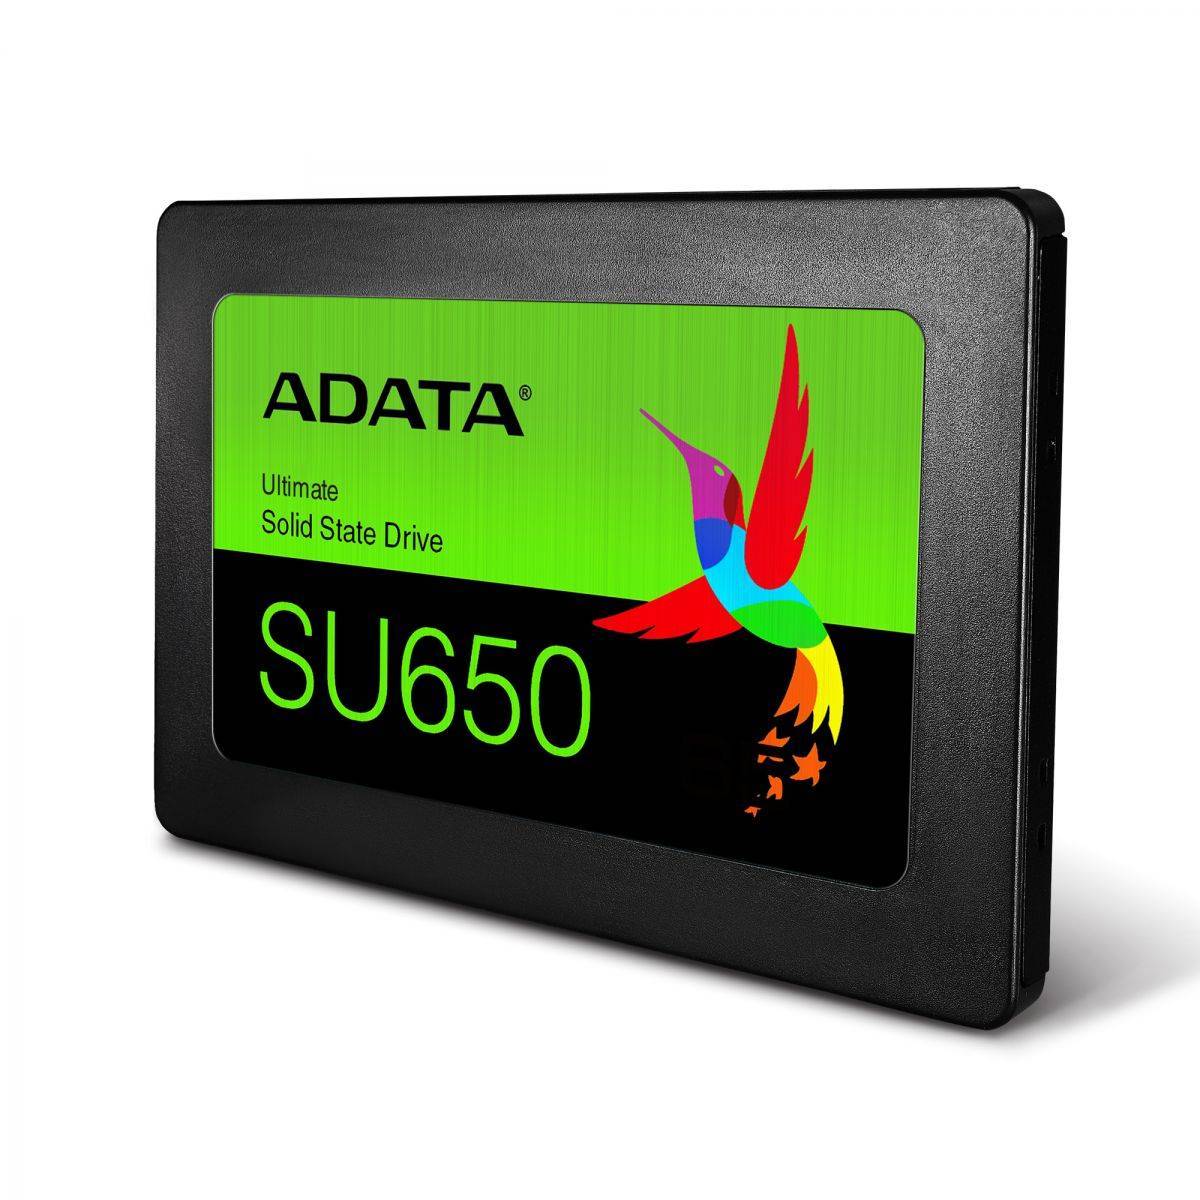 ADATA 240GB SSD SU650 TLC 2.5" SATAIII 3D NAND, SLC cach / without 2.5 to 3.5 brackets / blister